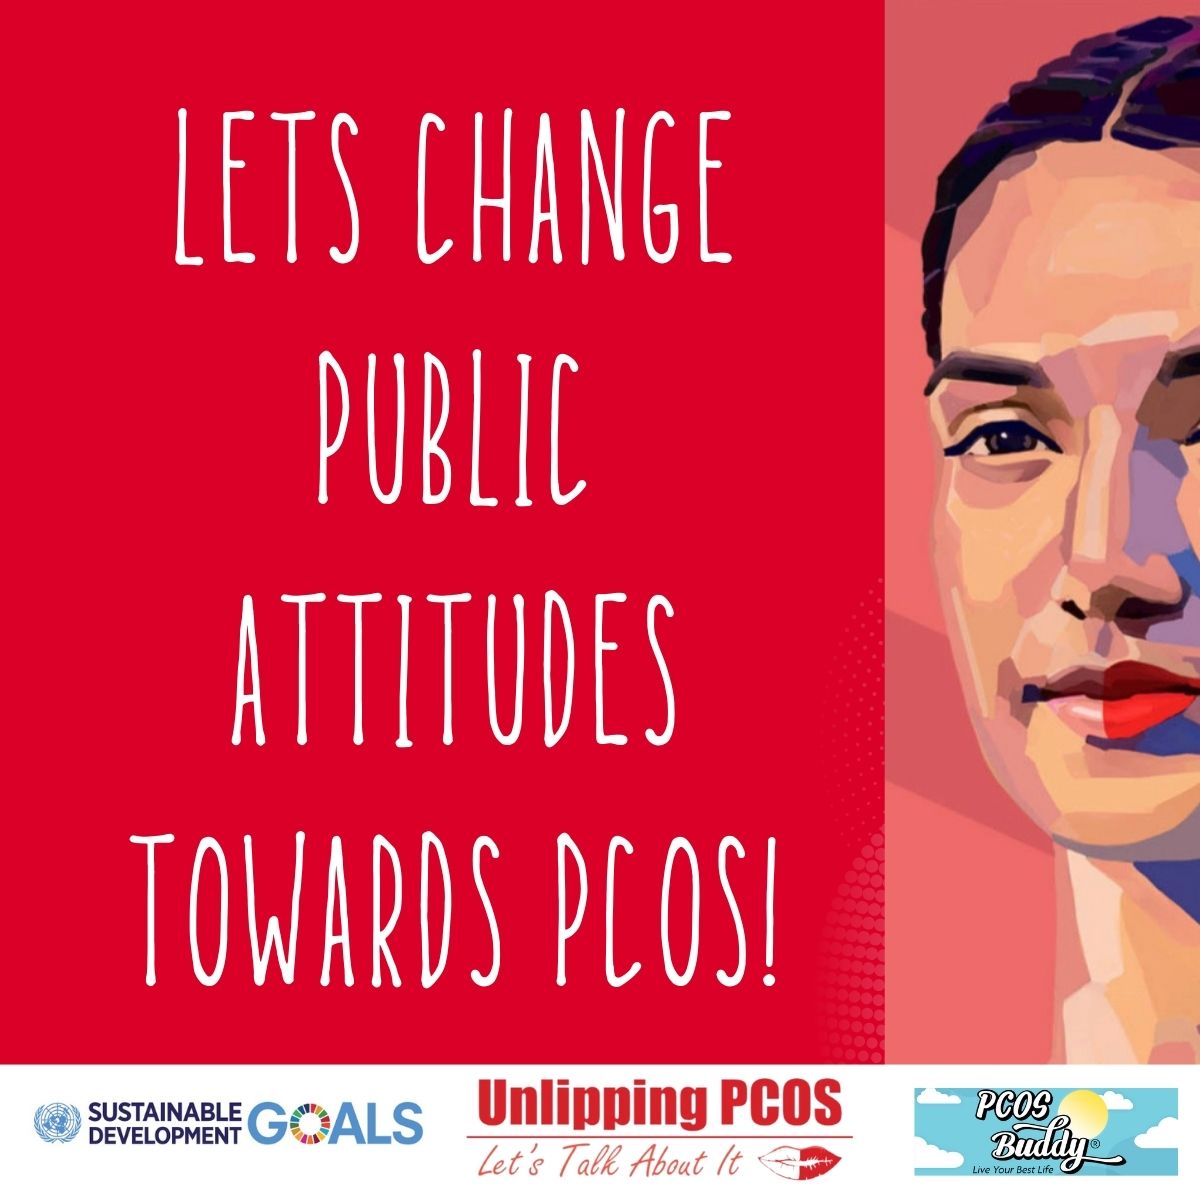 The 'Unlipping PCOS' campaign aims to dispel misconceptions about #PCOS, create a safe environment to share stories. The goal is to change attitudes towards PCOS and encourage more involvement in the cause.
#pcoscampaign #pcosadvice #oneinten #unlippingpcos #tacklethetaboo